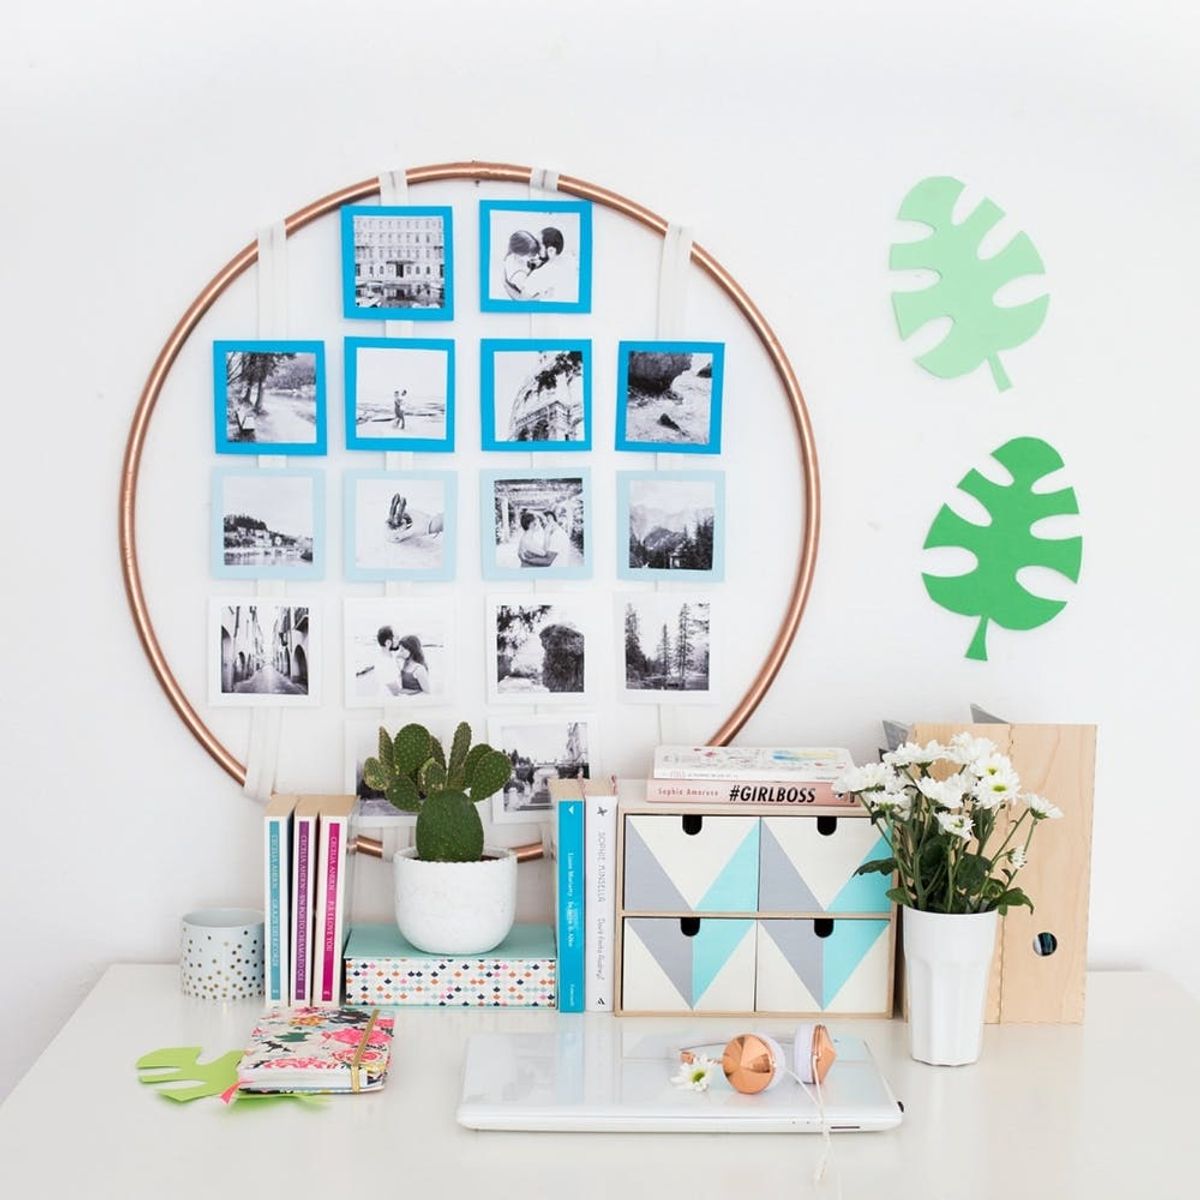 Try This Easy Photo Display DIY to Spruce Up Your Dorm Room